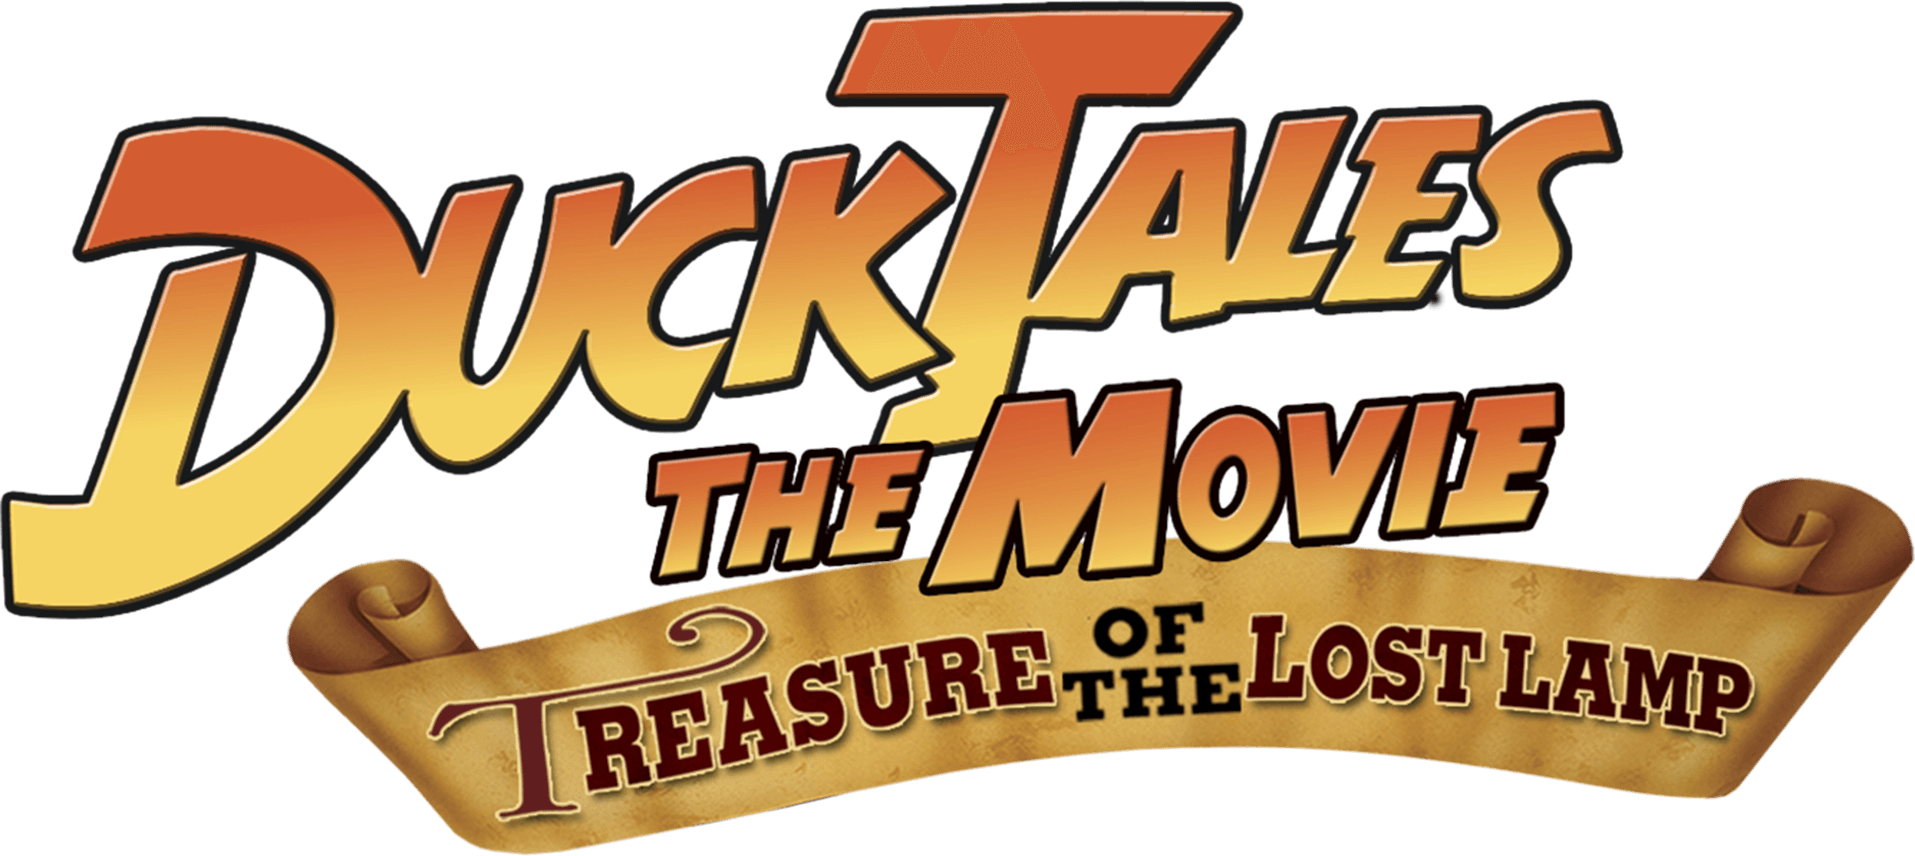 DuckTales: The Movie - Treasure of the Lost Lamp logo